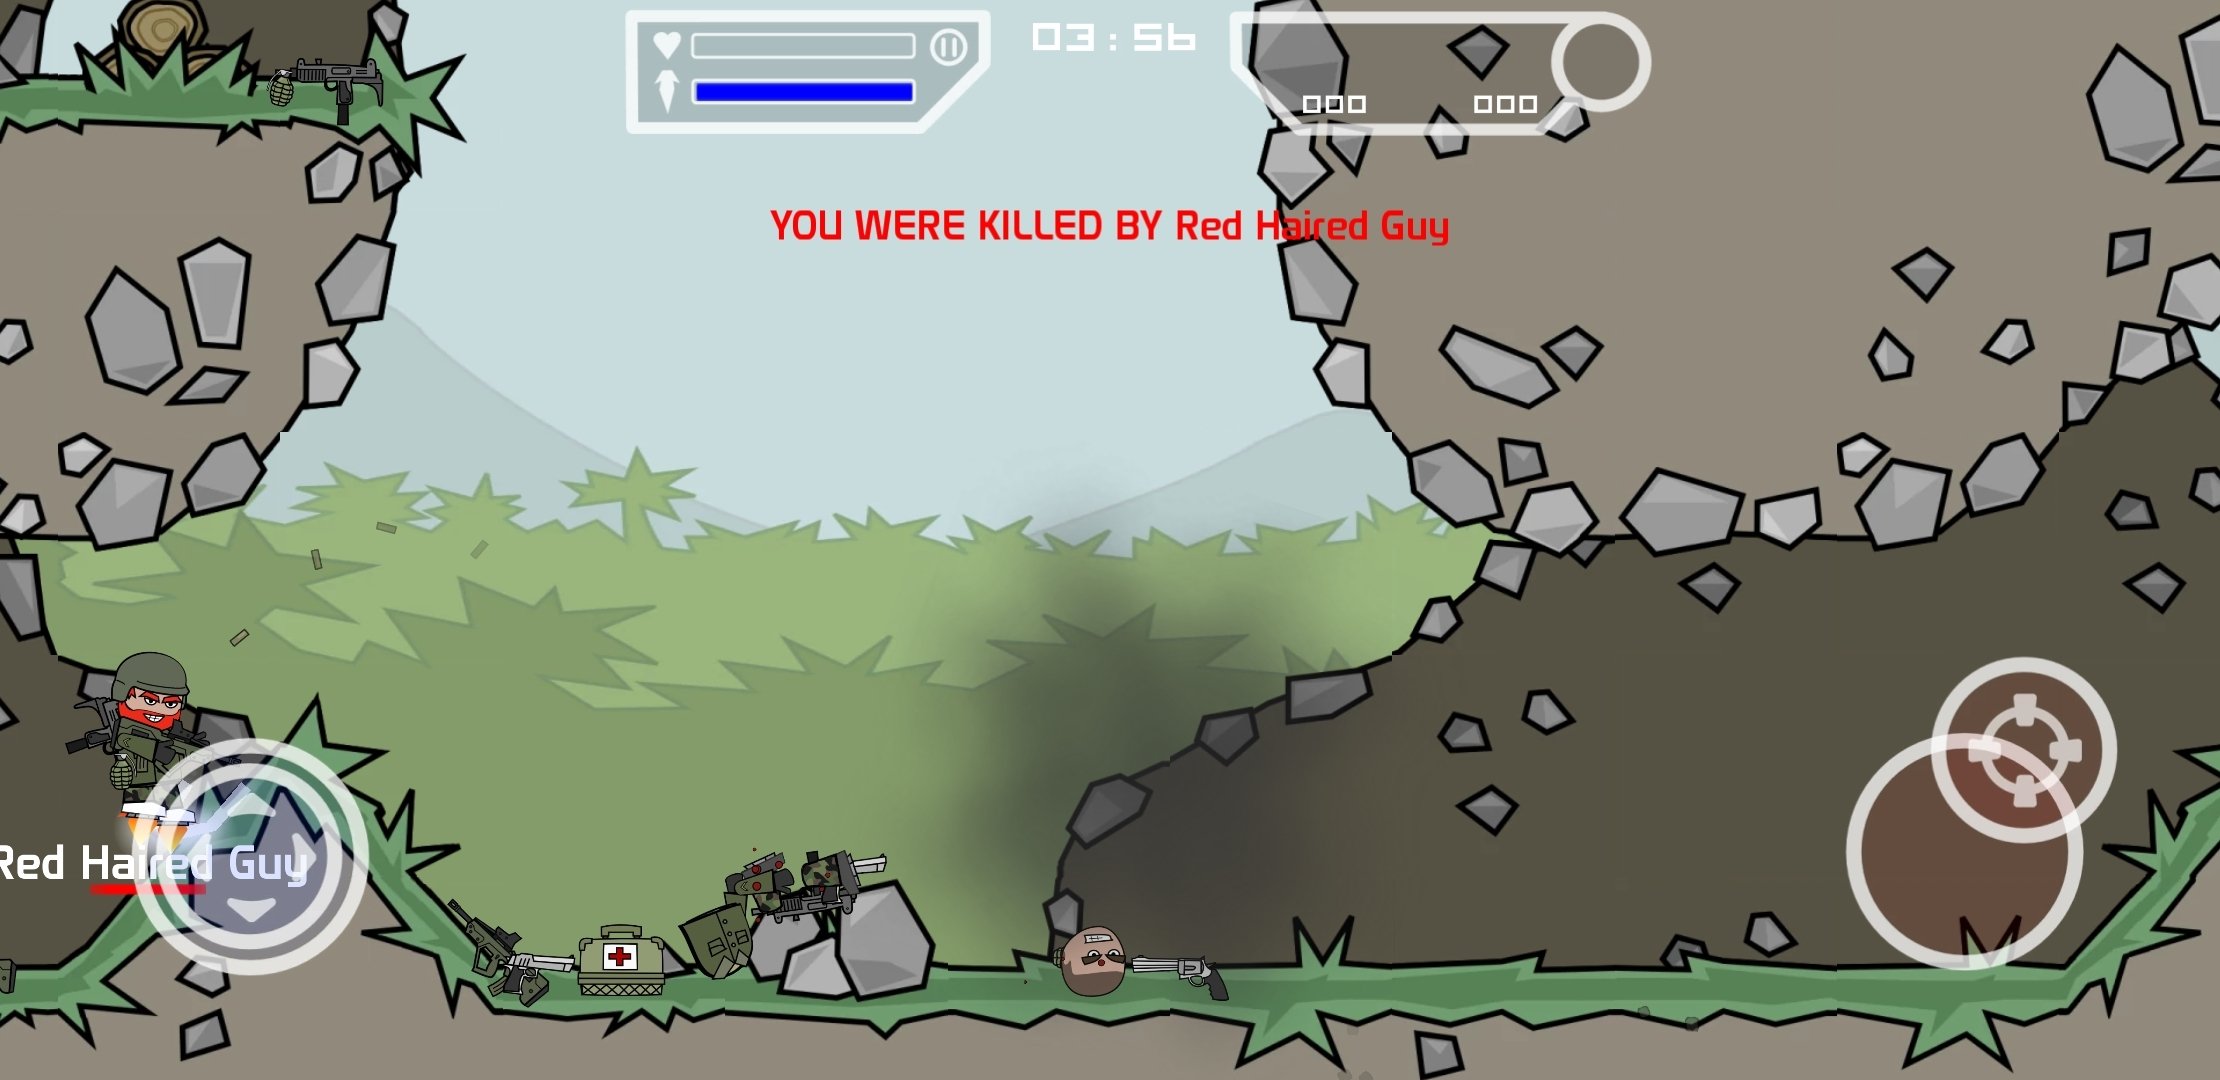 play doodle army 2 mini militia in android version 5.0